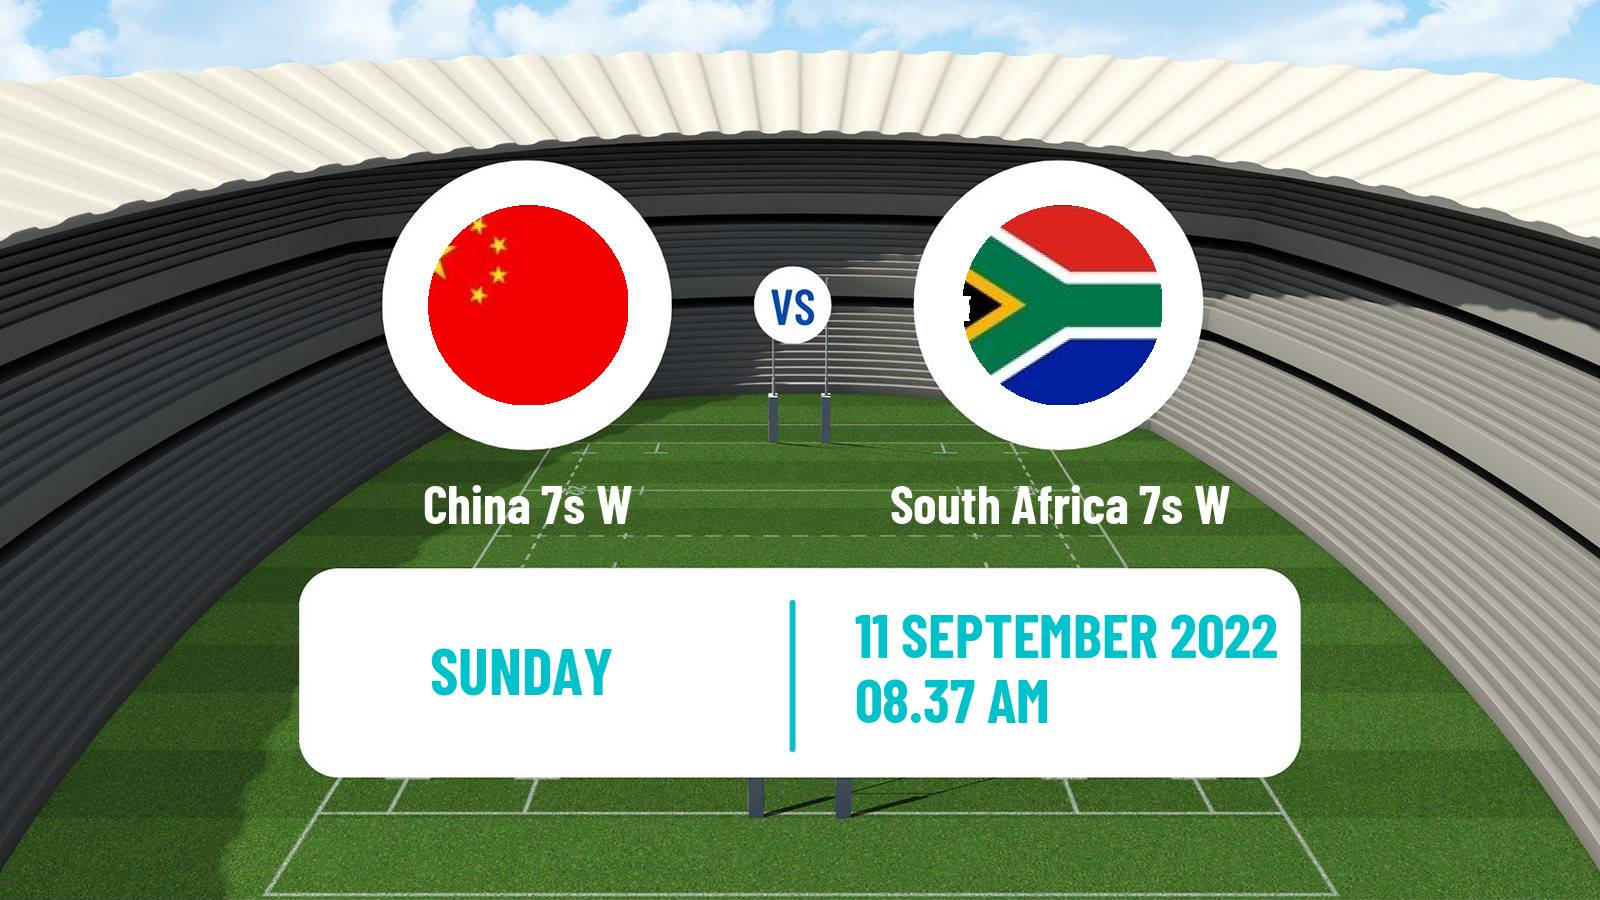 Rugby union Sevens World Cup Women China 7s W - South Africa 7s W